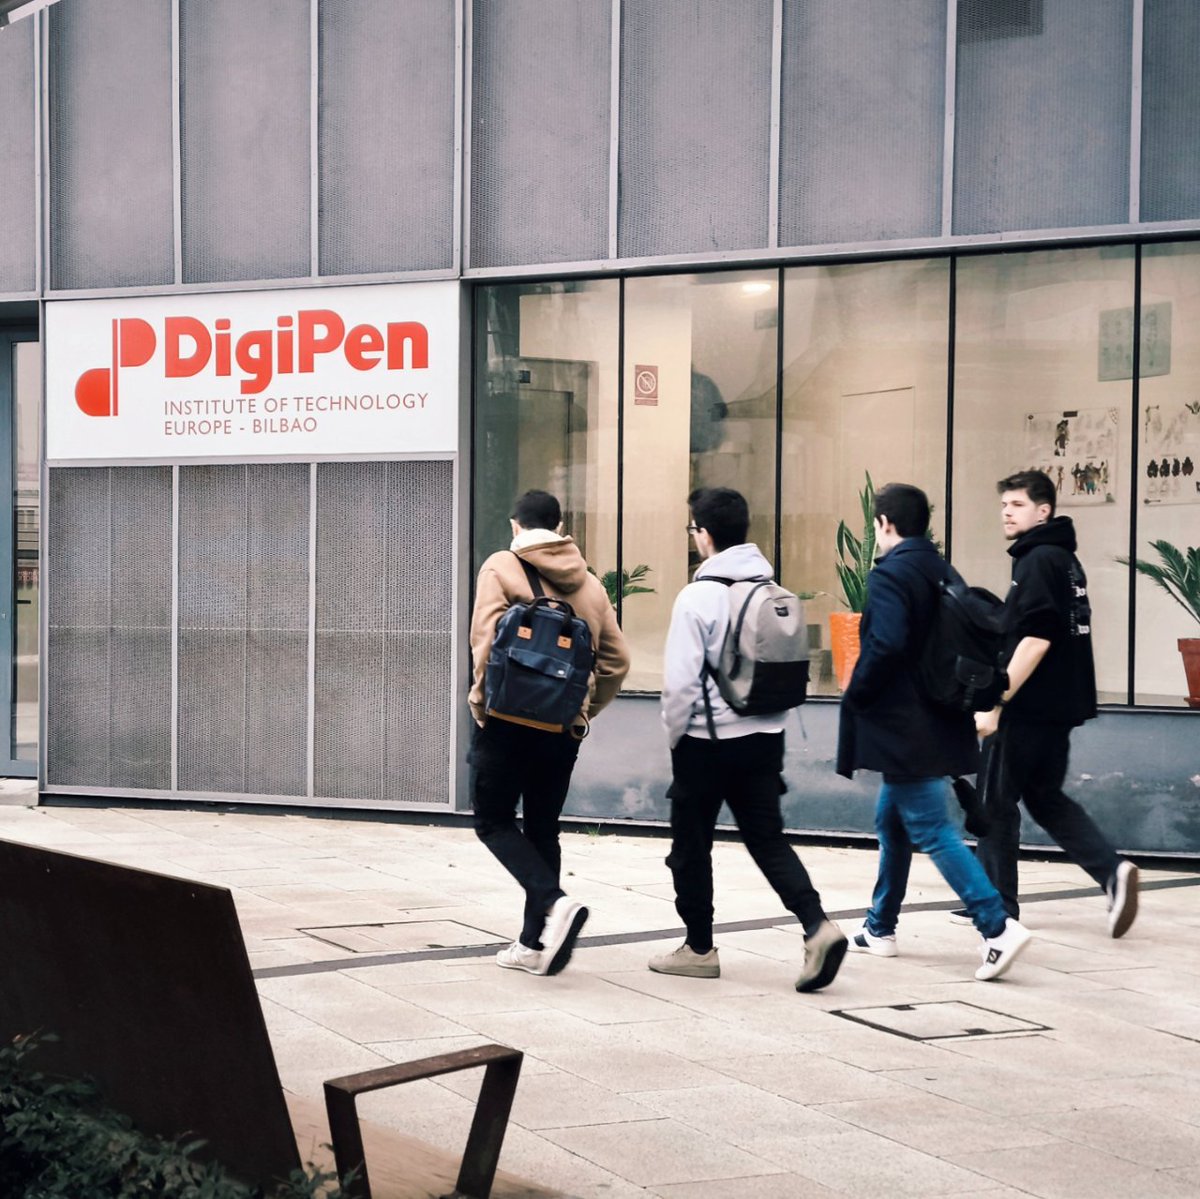 🌞📚 Happy Friday! 😎 It's time to start the day with enthusiasm and positive energy! 💪🏼  Did you know Fridays are usually when the Project-related classes such as videogames and short films are crafted? 🎬 🎮 #DigiPenEuropeBilbao #DigiPen #DigiPenDragons #StudentLife 📸✨